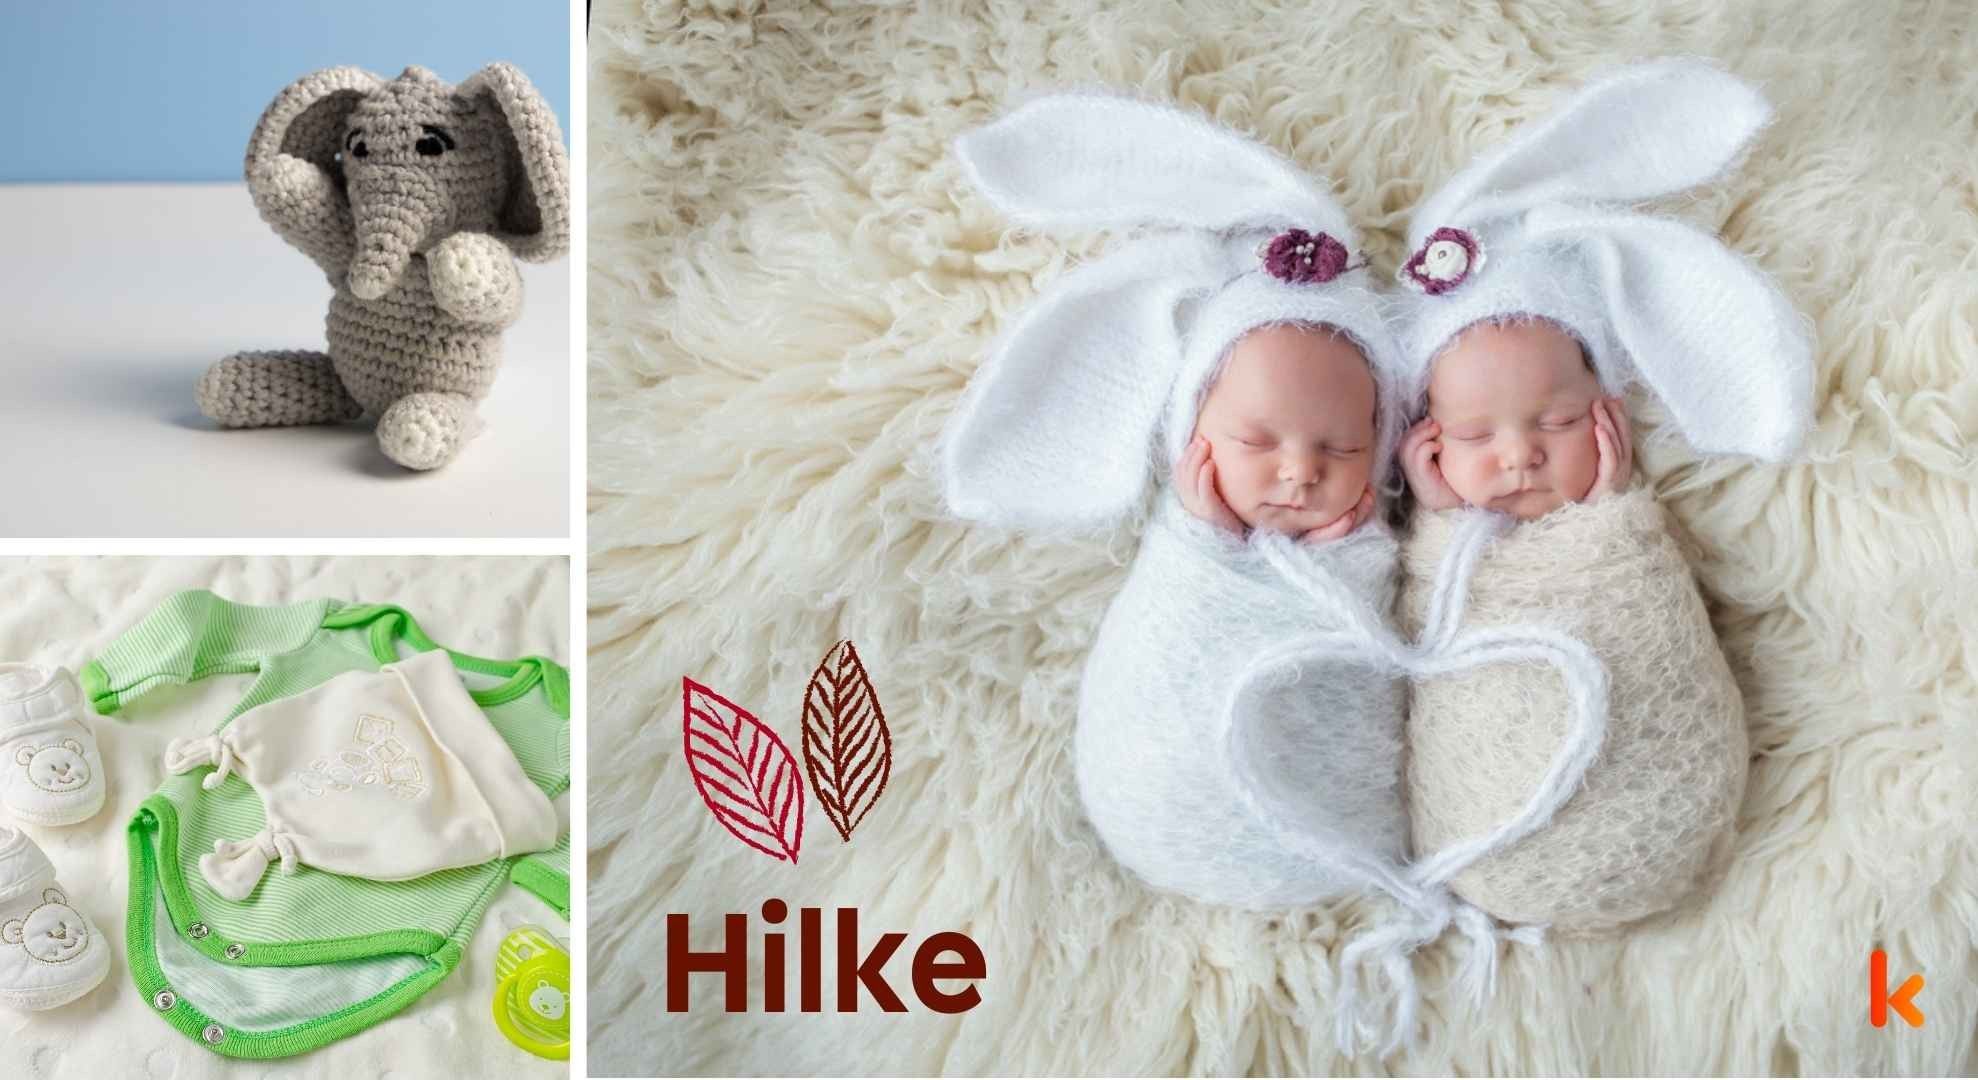 Meaning of the name Hilke